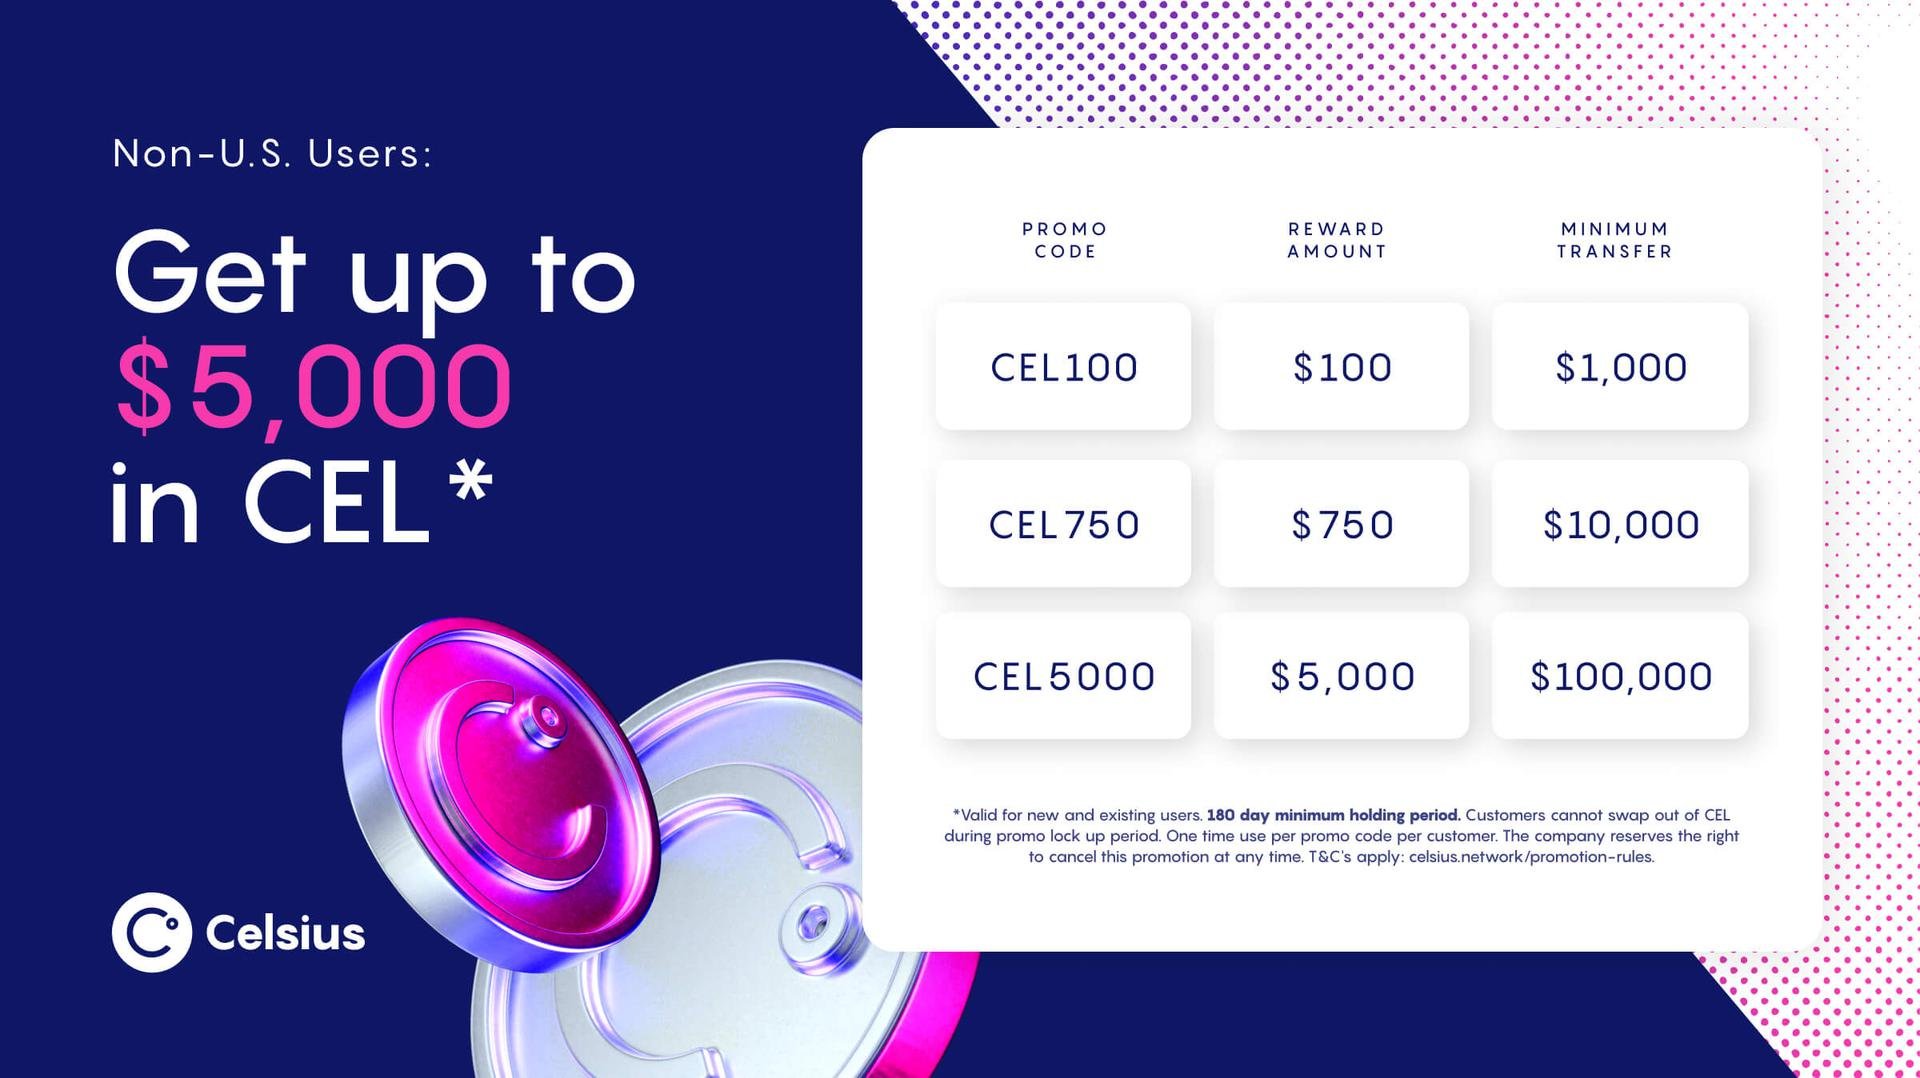 Get up to $5,000 in bonus CEL with Celsius promo codes and earn up to 30% more on your weekly rewards.*